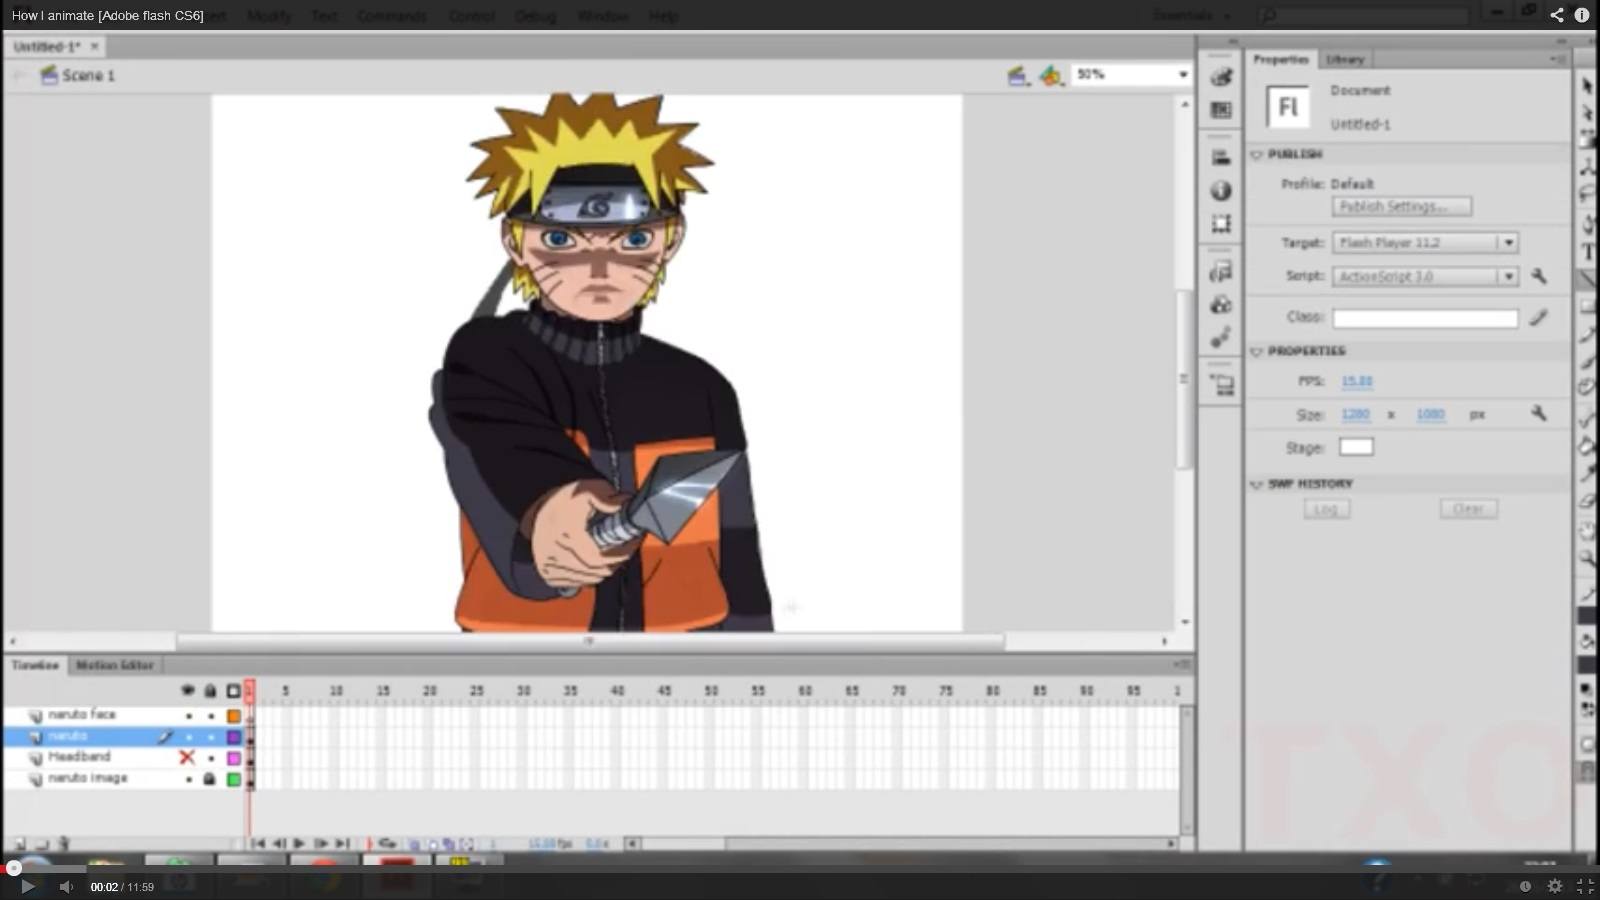 adobe flash 2d animation software free download full version